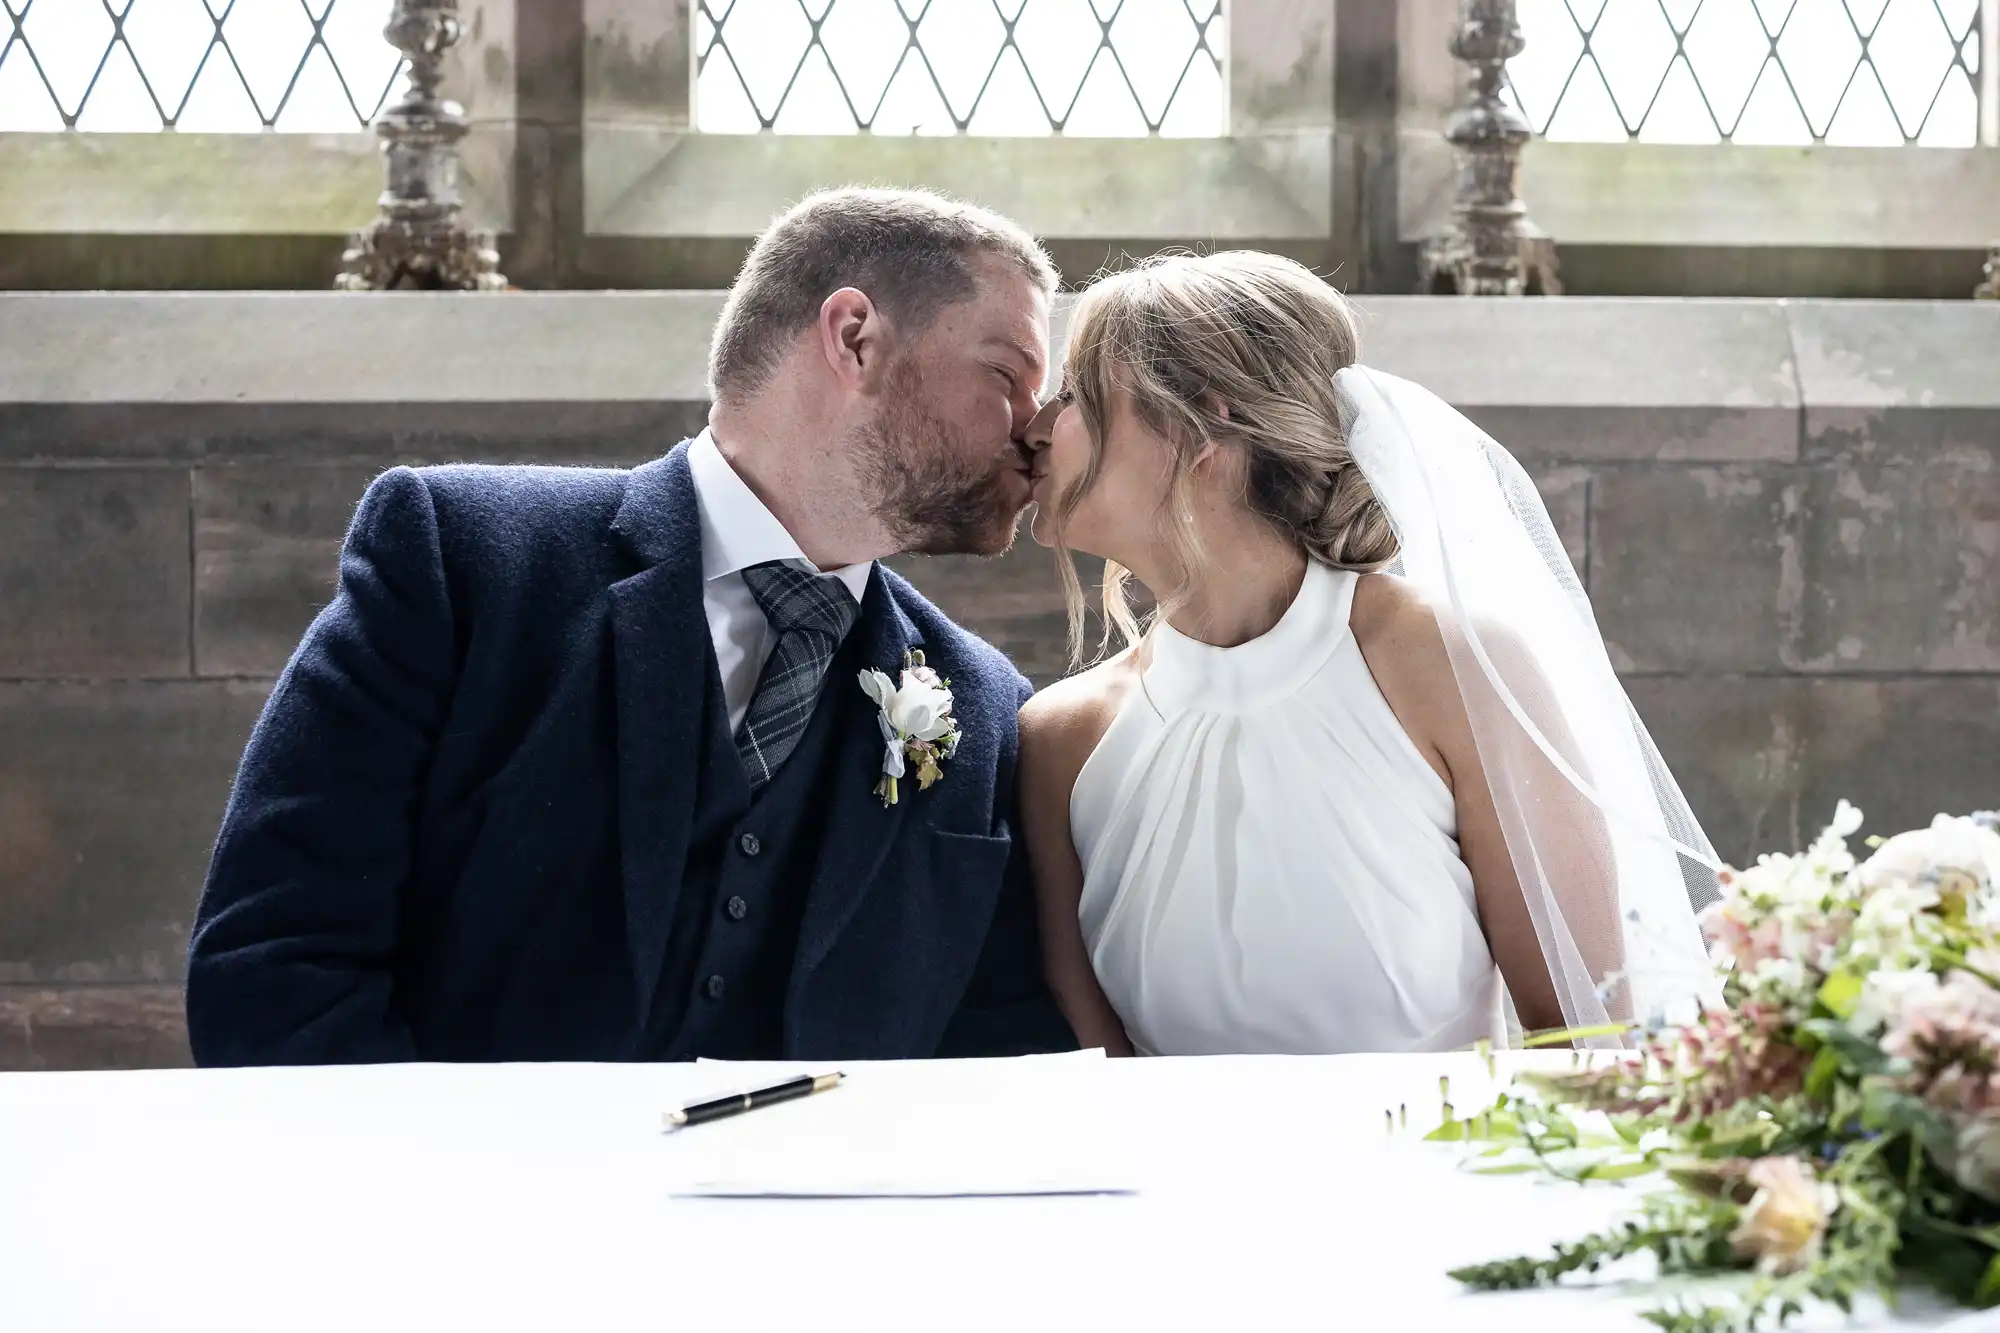 Bride and groom kissing at the signing table in a church, with natural light streaming through windows and flowers beside them.